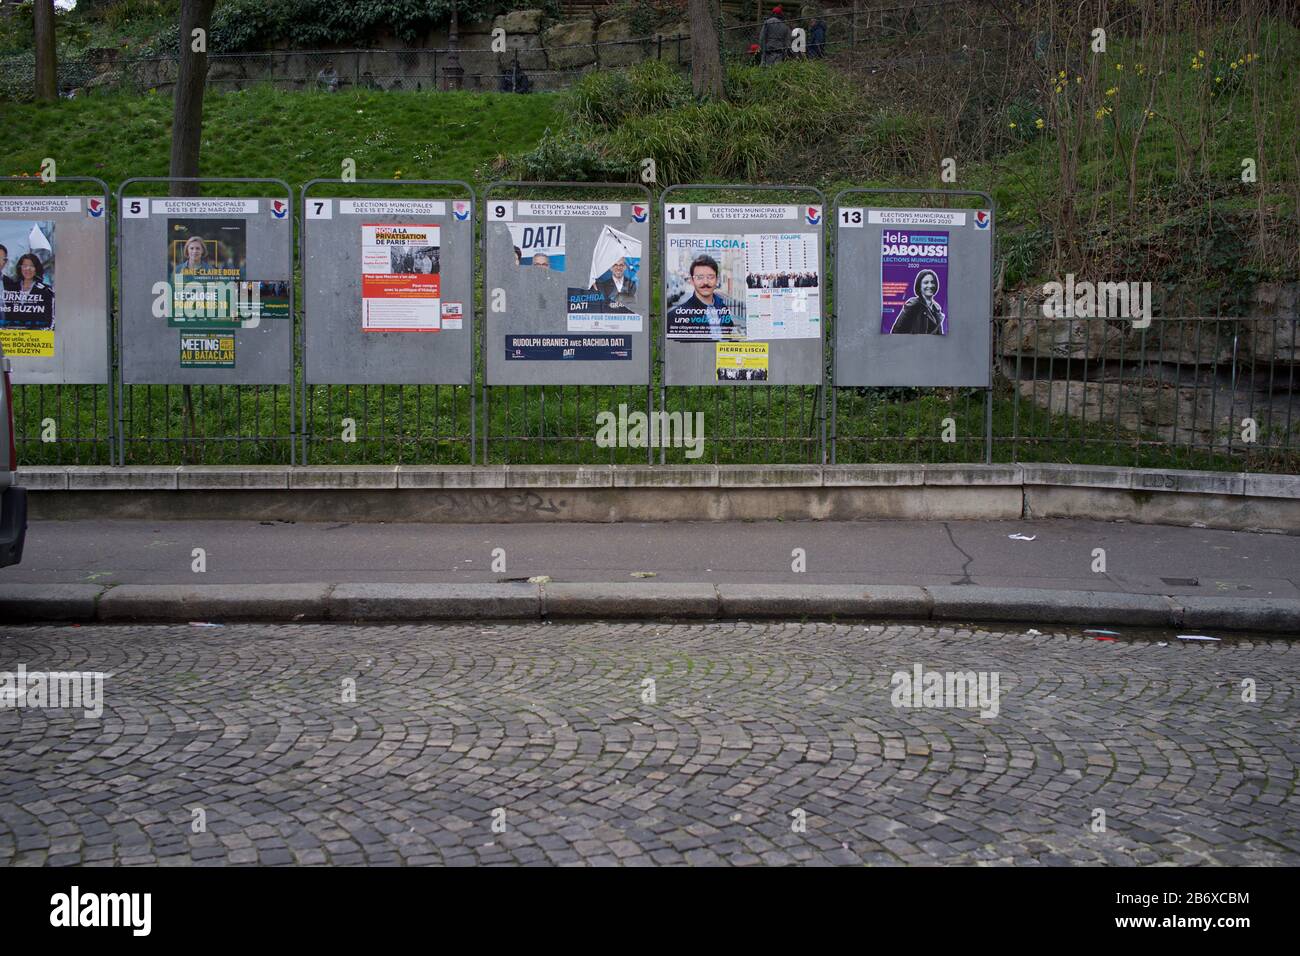 Display panels showing electoral candidates running in French municipal elections, rue Ronsard, Montmartre, 75018 Paris, France, March 2020 Stock Photo